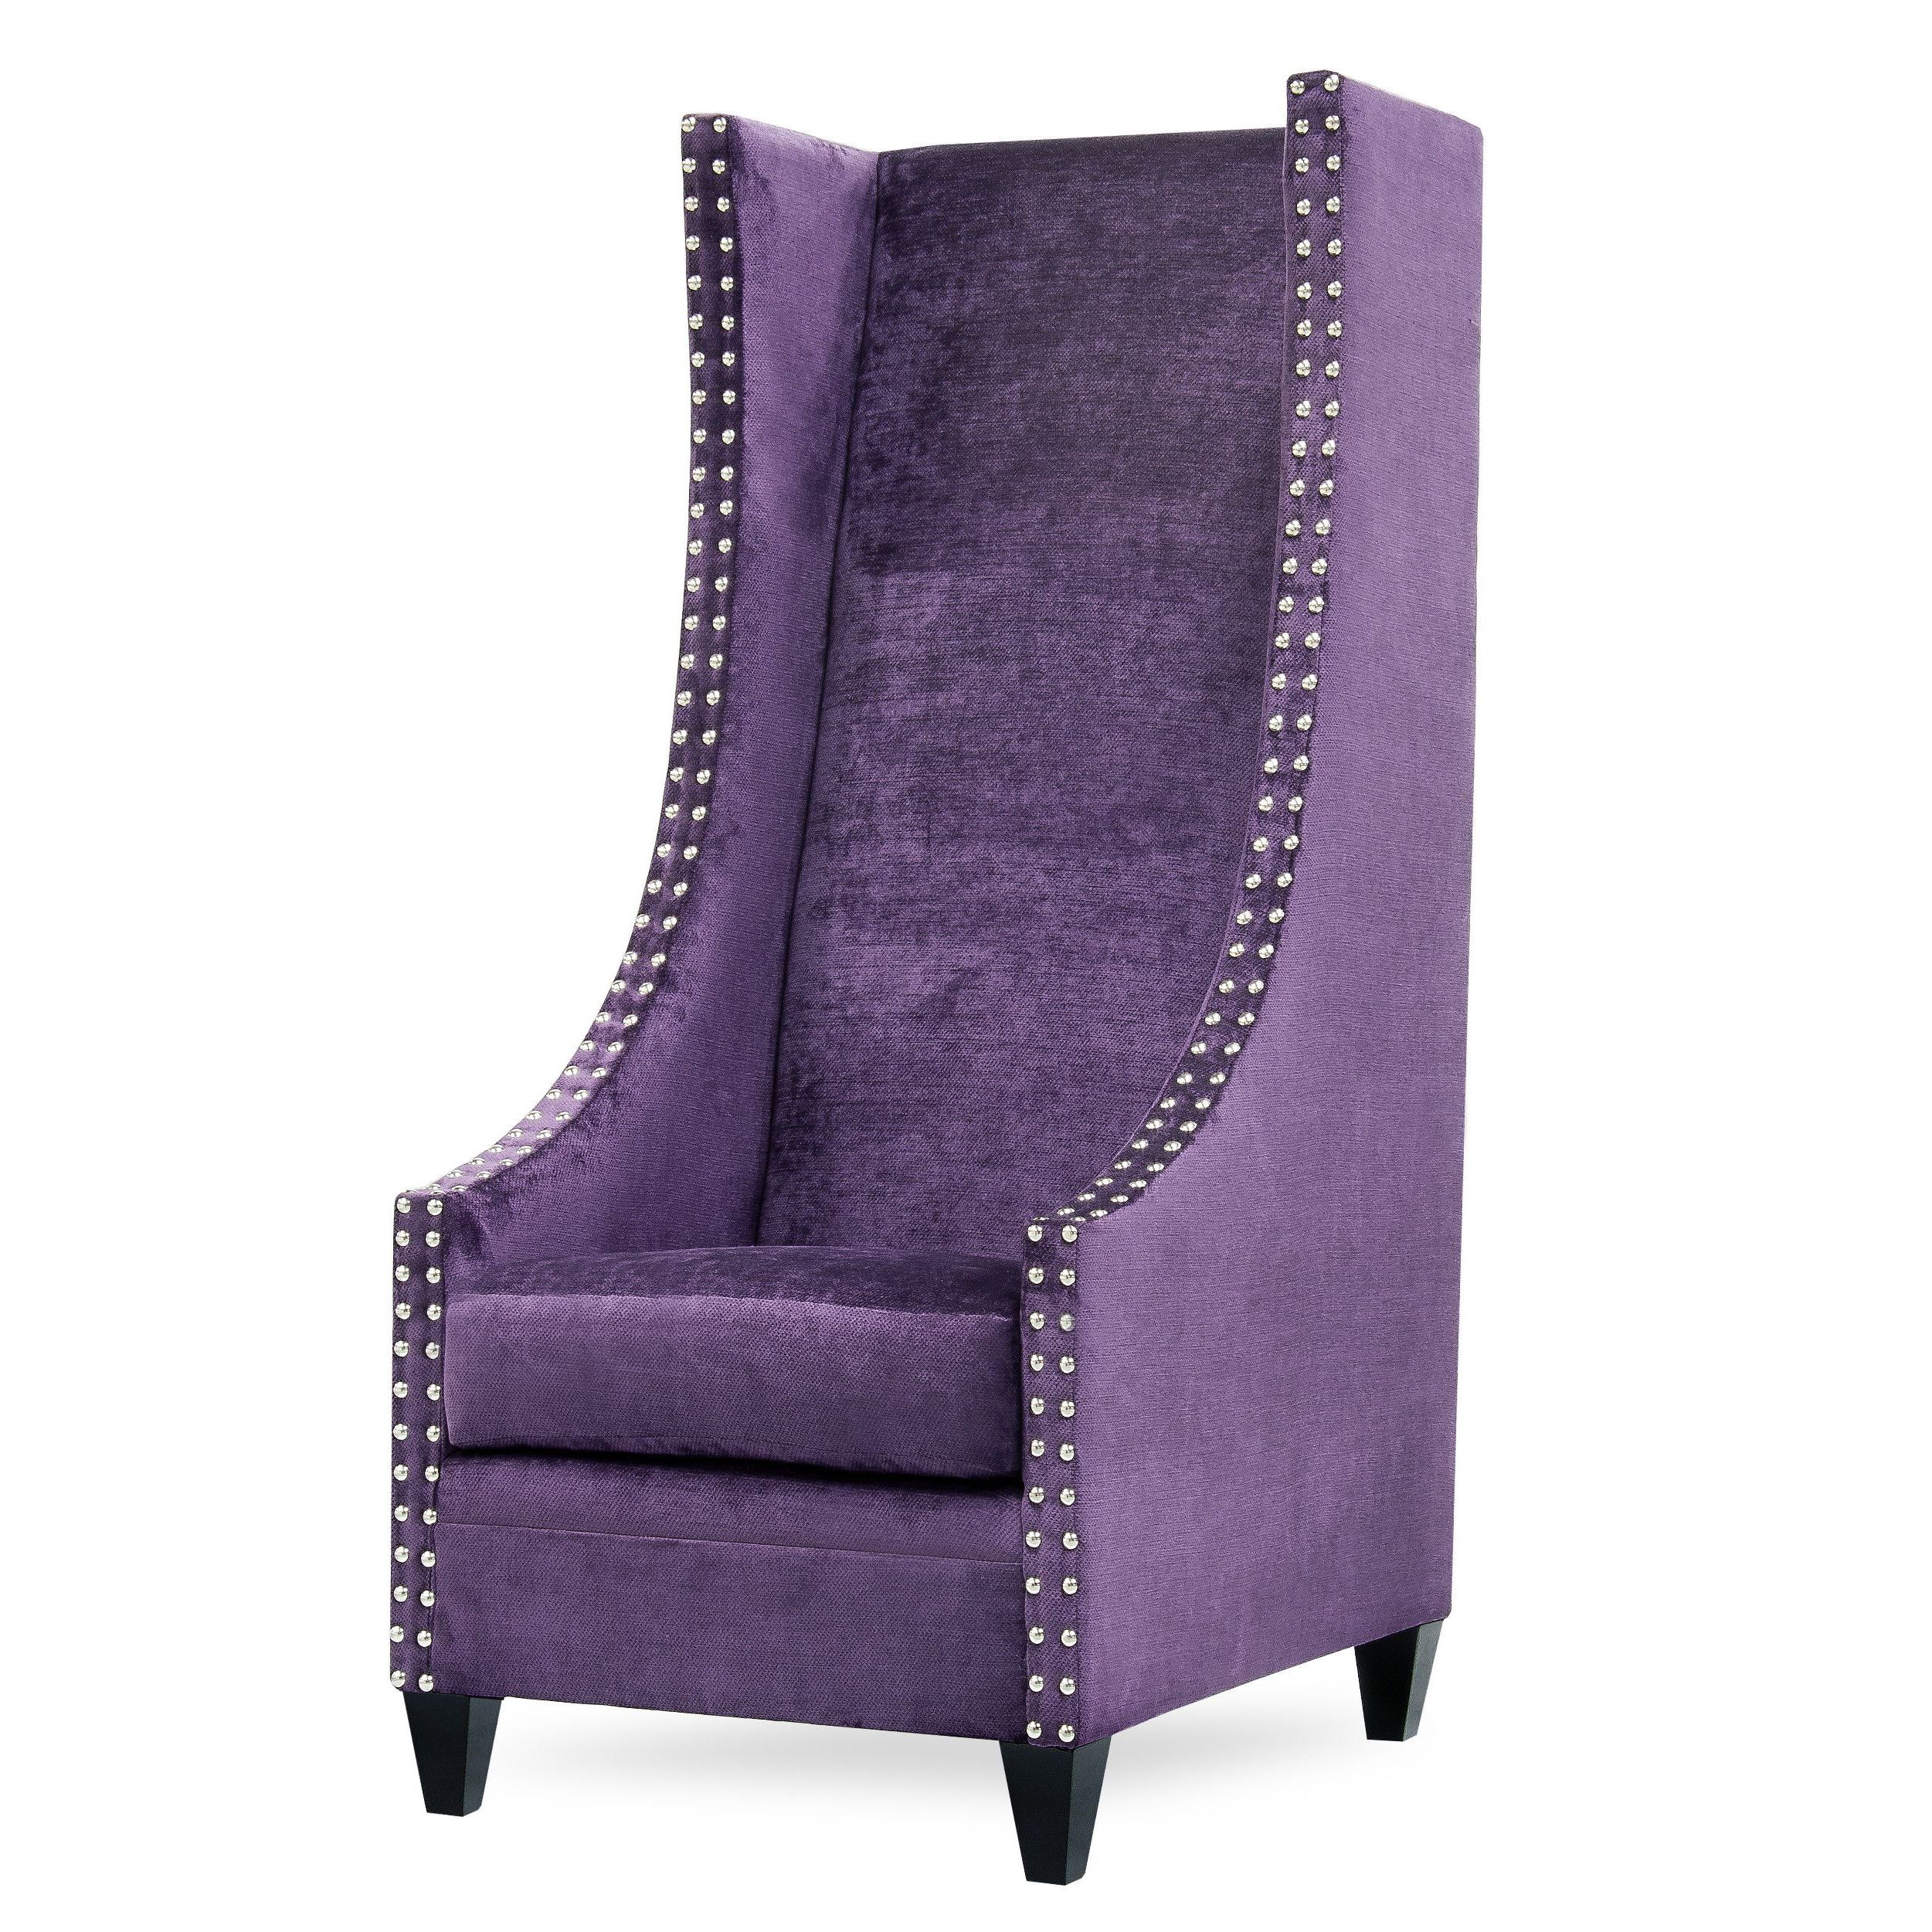 Uniquelyfurnished Saige Tall Wingback Chair & Reviews Regarding Favorite Saige Wingback Chairs (View 3 of 20)